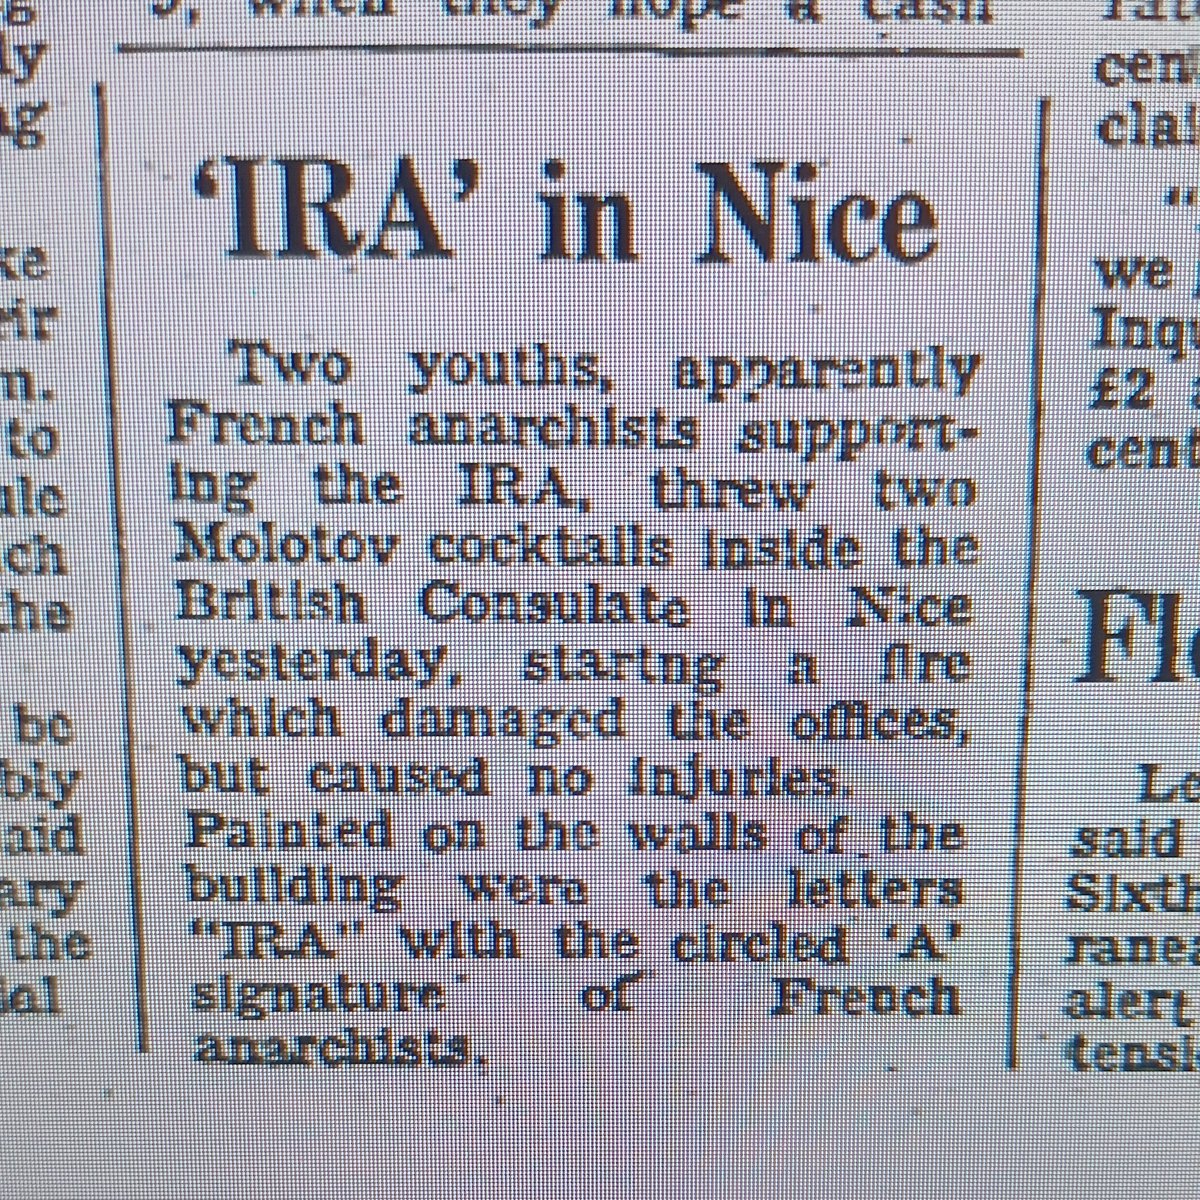 Lot of lost history in terms of the international reaction to the 'Troubles'. November 1971: two French anarchists threw petrol bombs into the British consulate in Nice